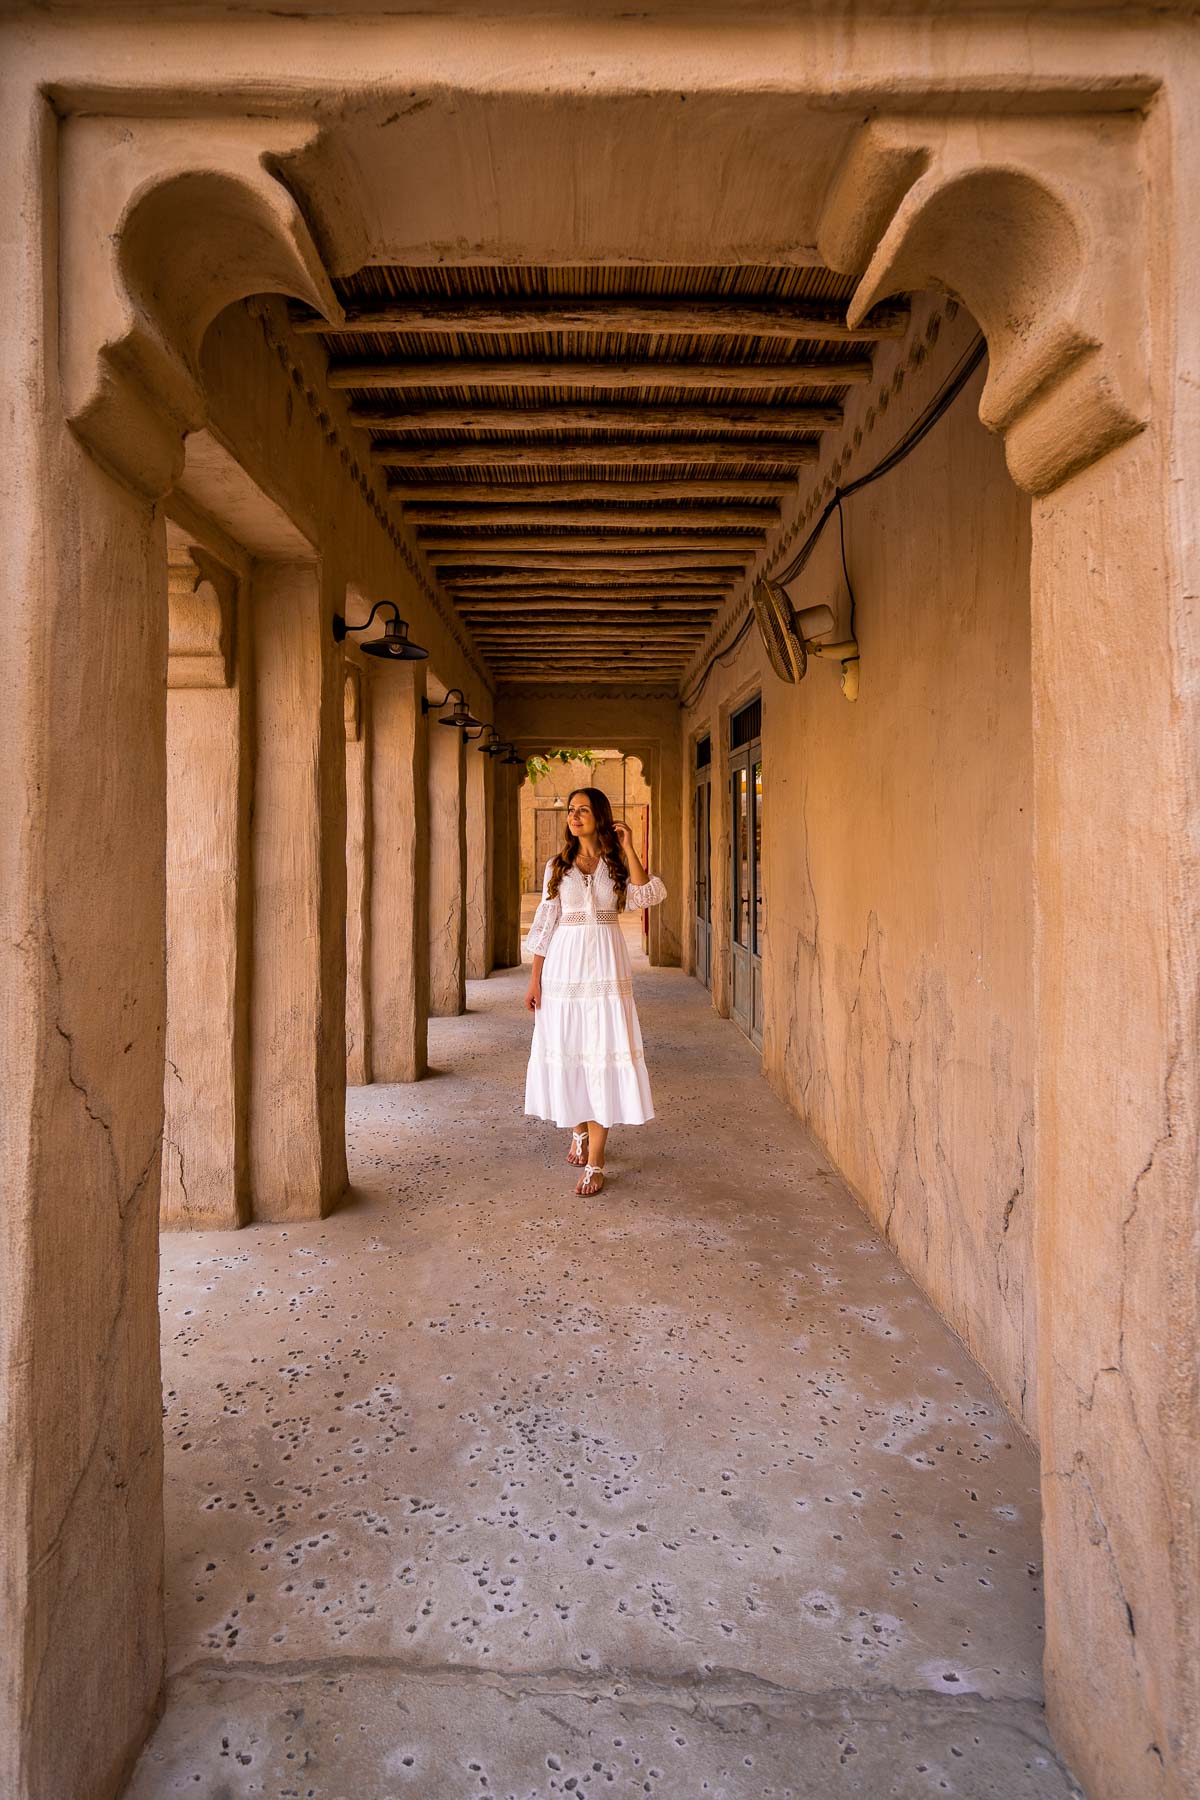 Girl under an archway in Old Town Dubai